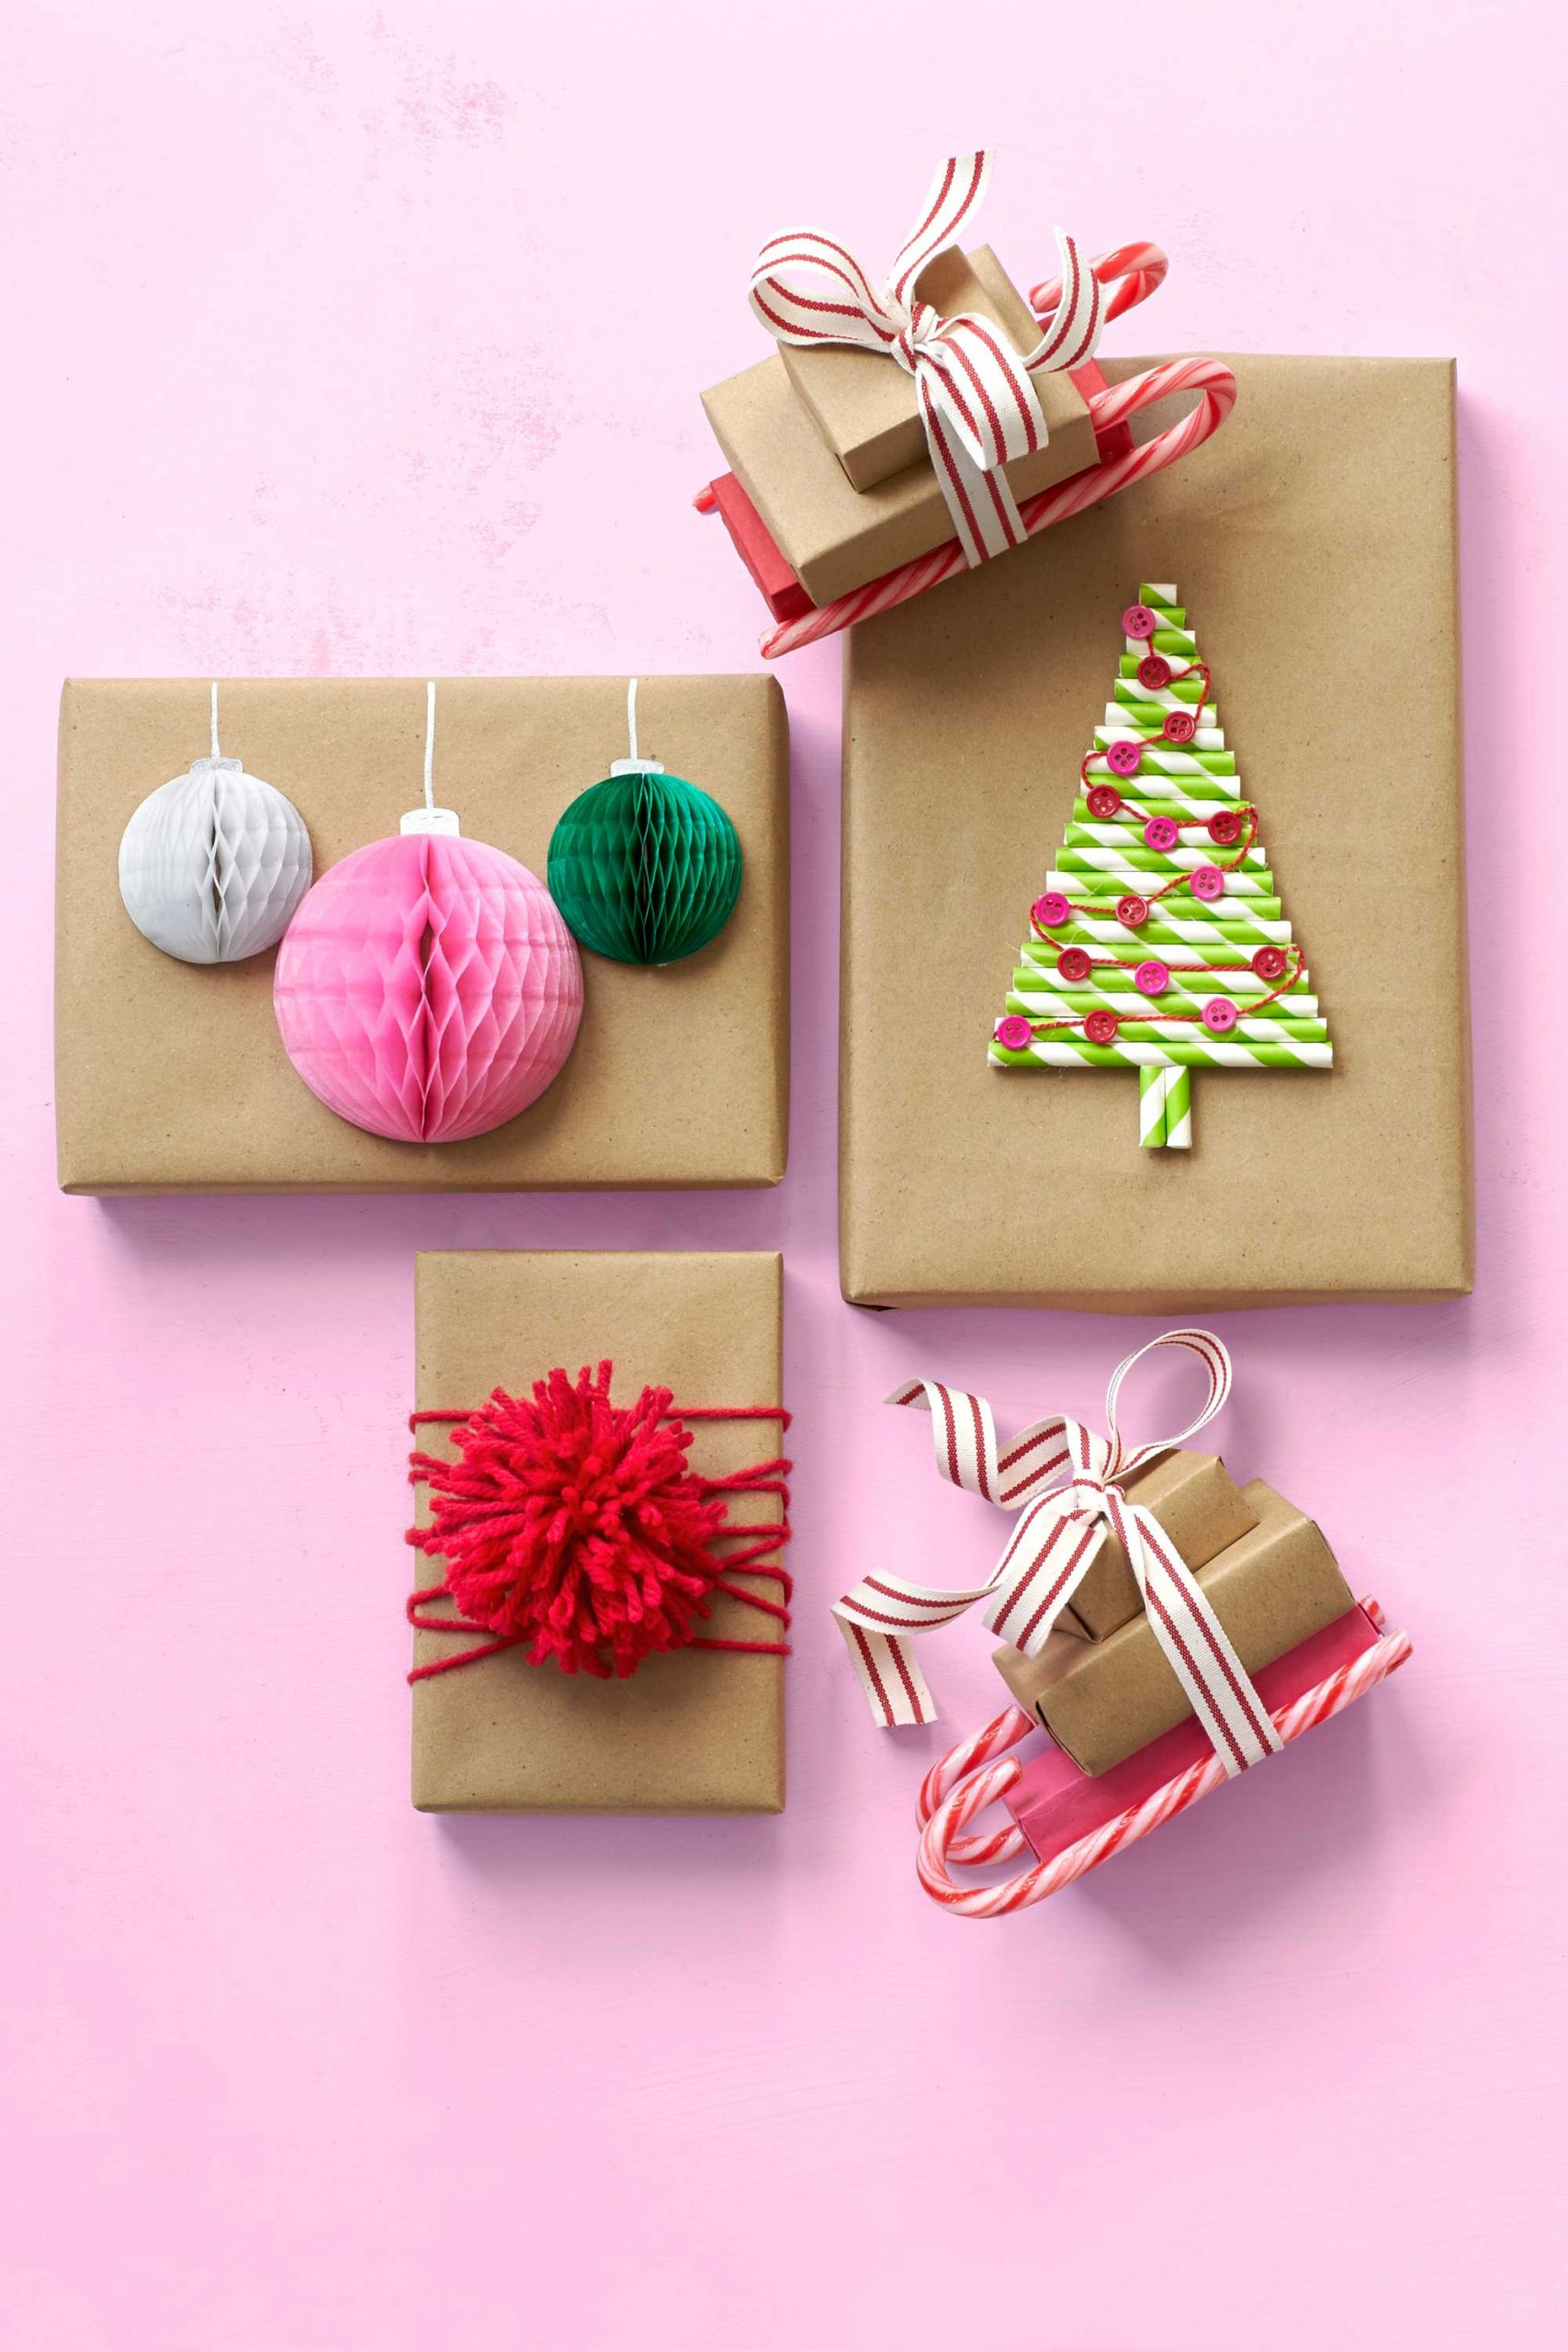 Holiday Gift Wrapping Ideas
 30 Unique Gift Wrapping Ideas for Christmas How to Wrap